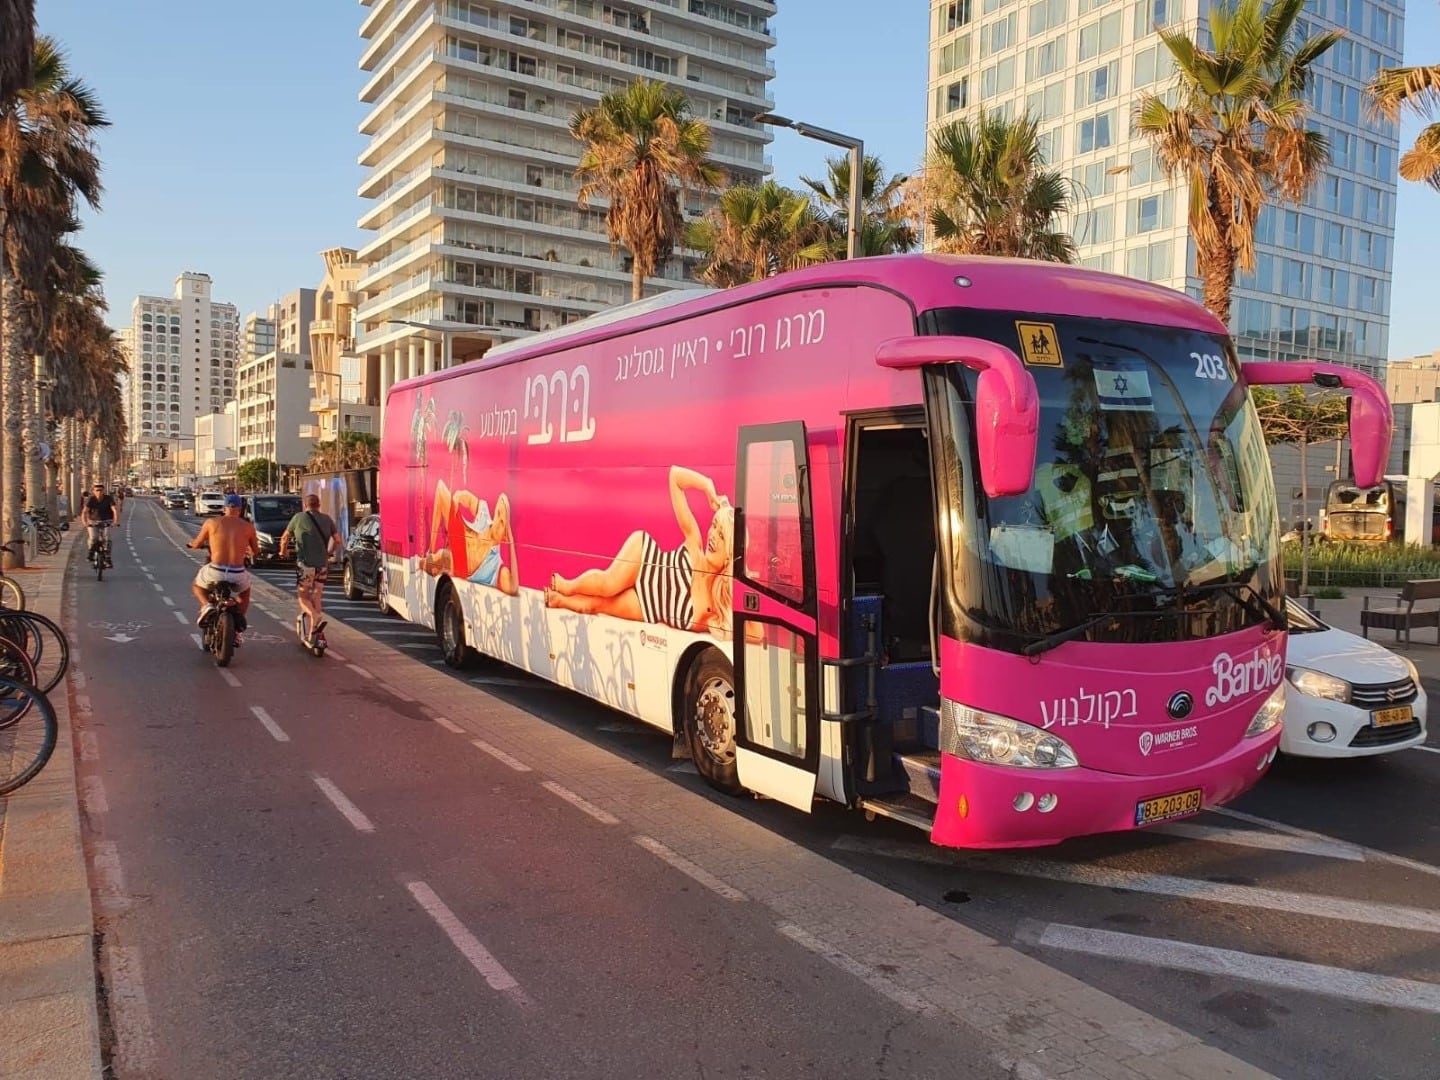 A pink bus is parked on a street in tel aviv. Barbie Poster is printed on the bus